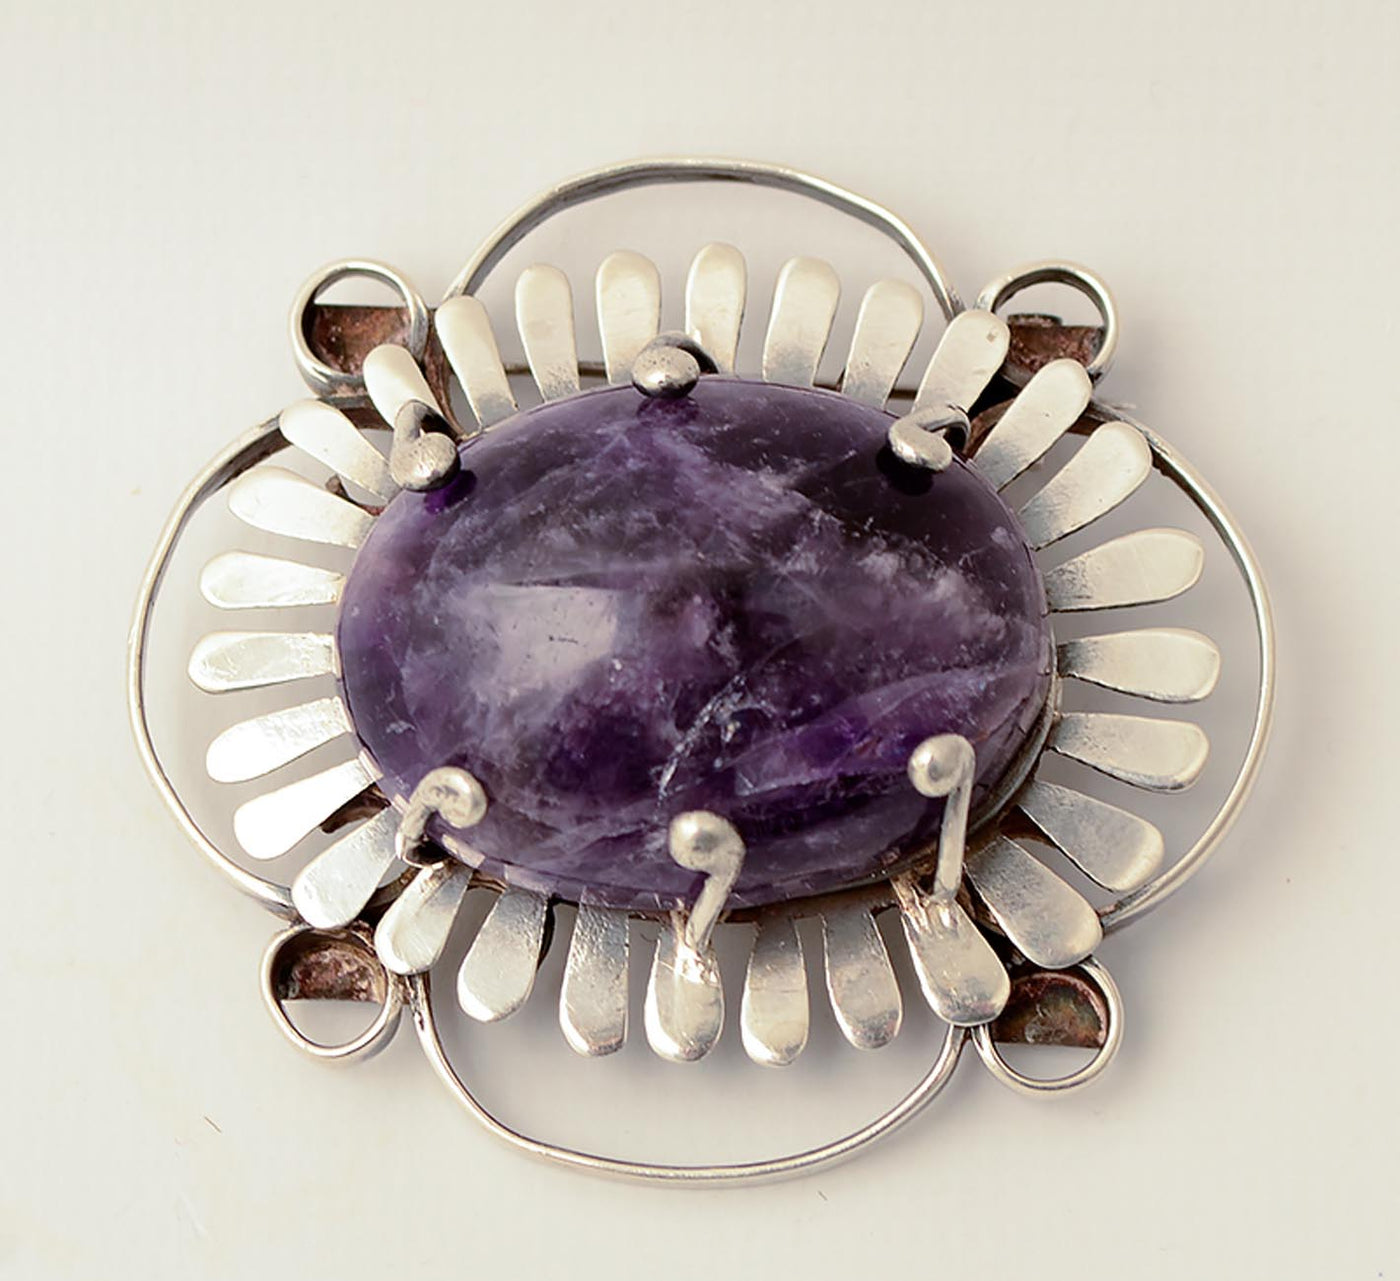 large-silver-brooch-with-amethyst-item-1233377